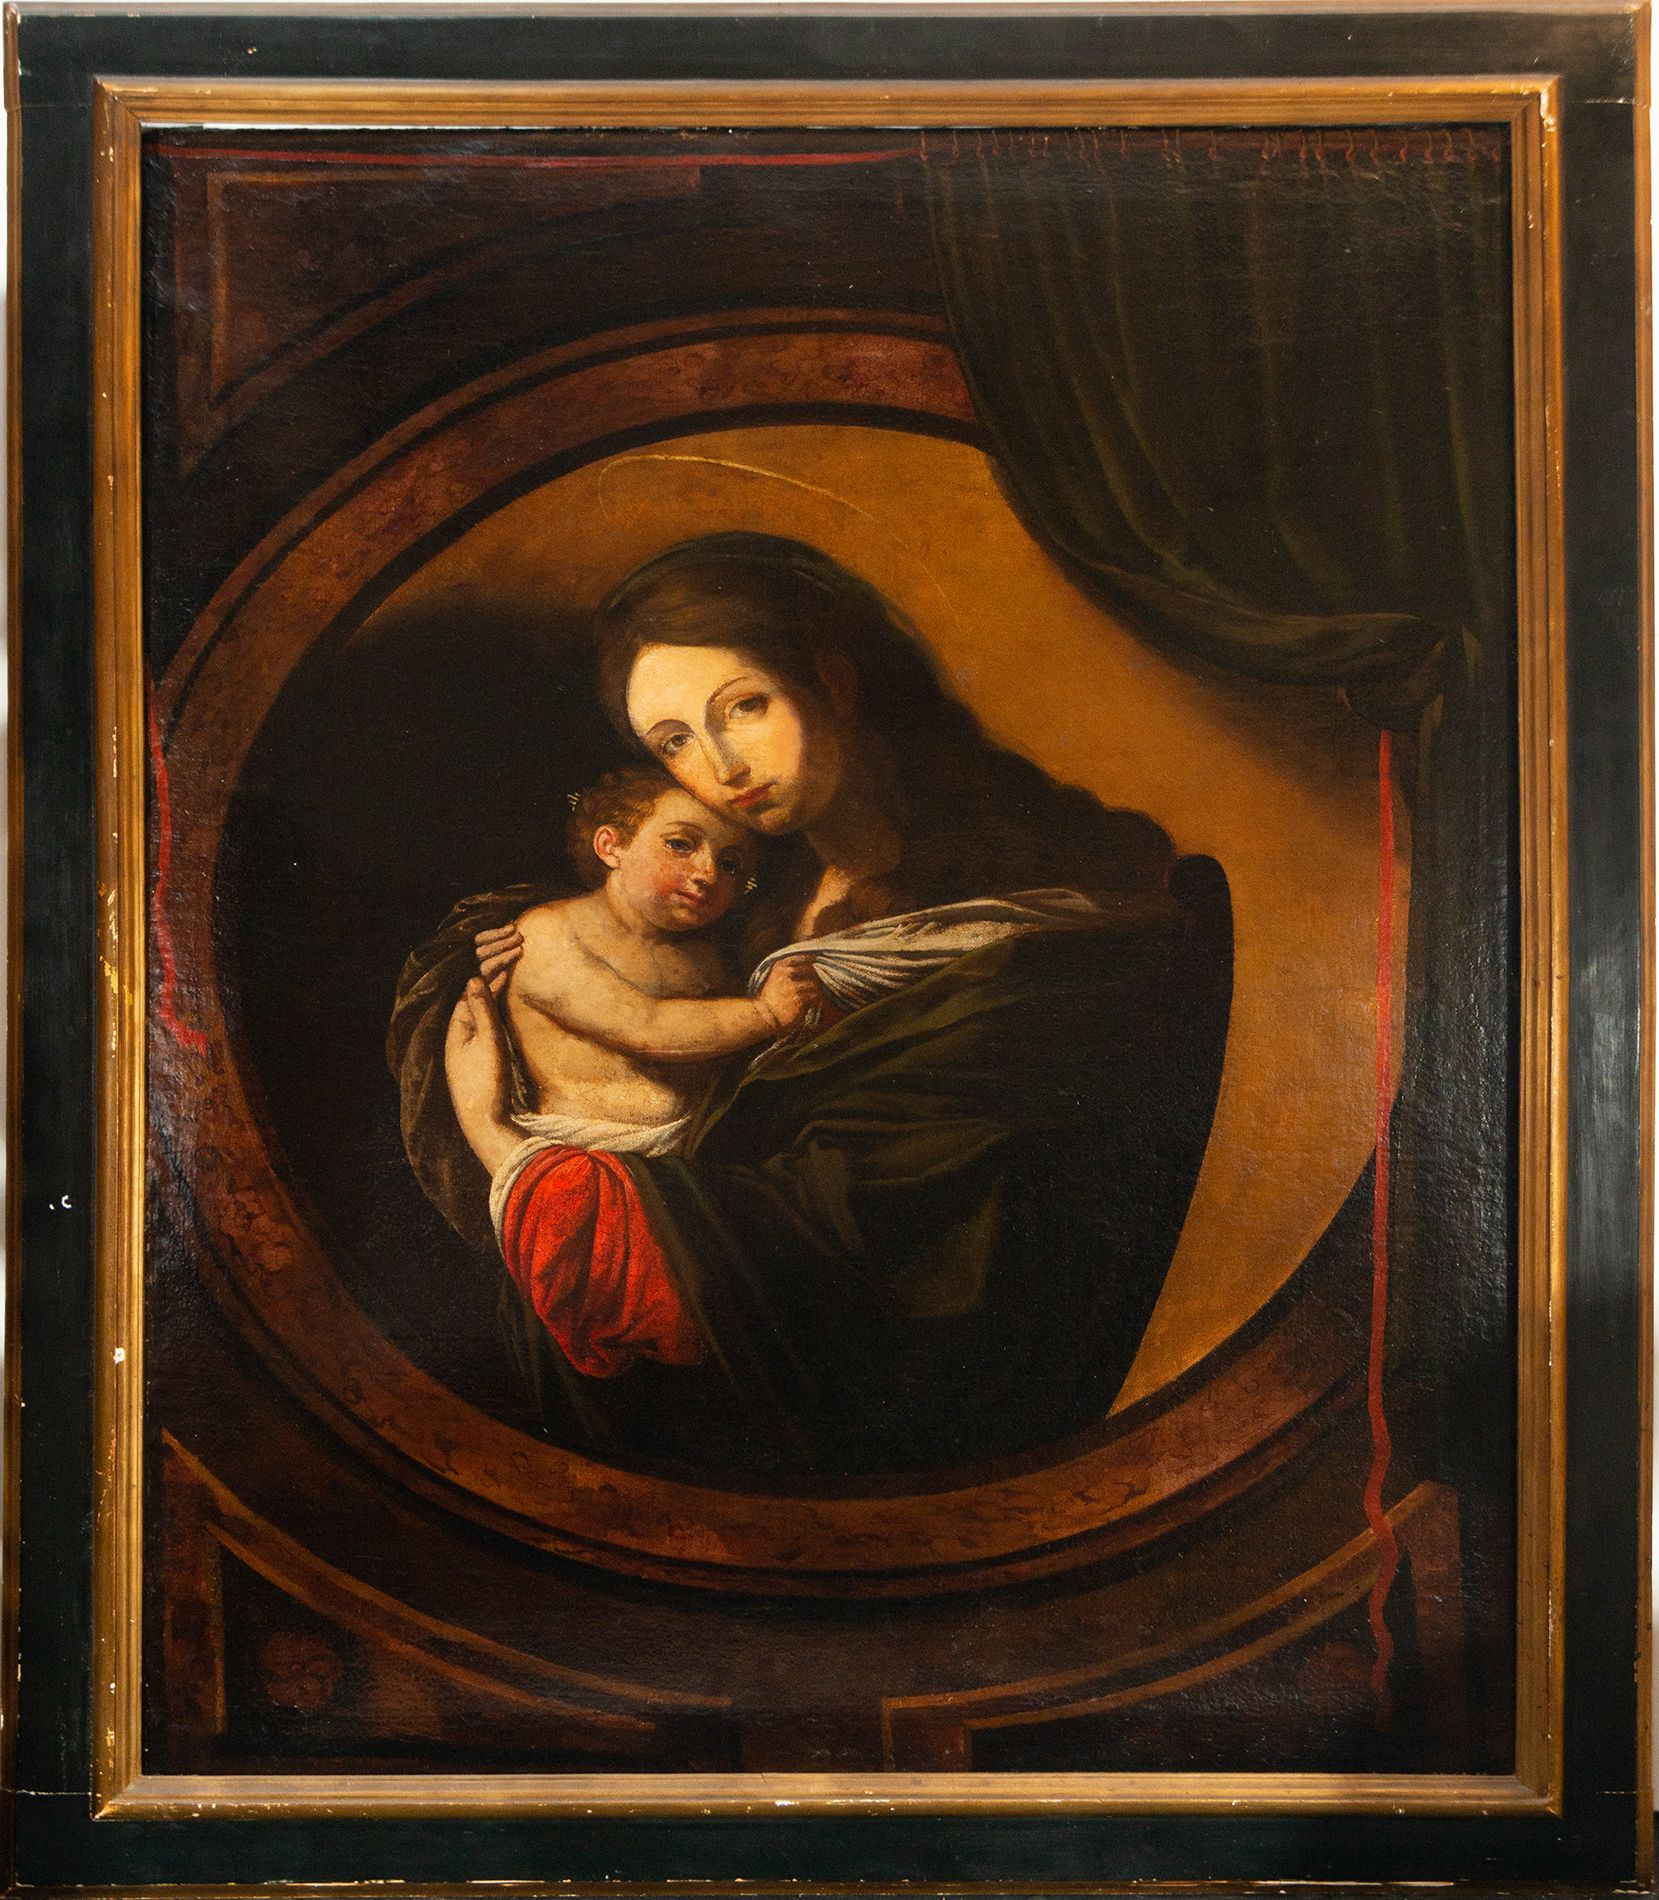 Virgin with Child in Arms, Italian school of the 17th century Vergine con Bambin&hellip;